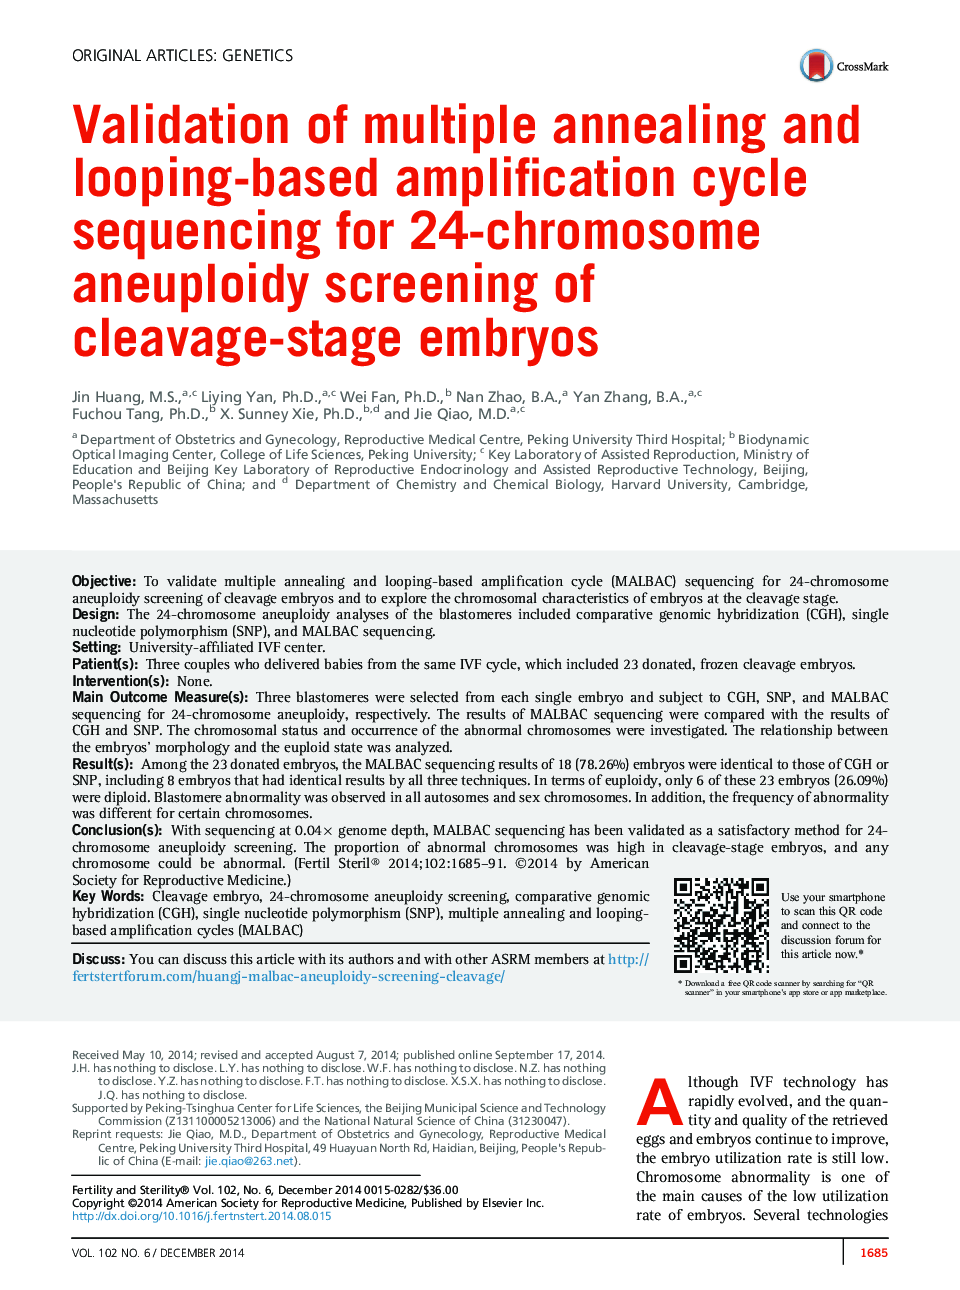 Validation of multiple annealing and looping-based amplification cycle sequencing for 24-chromosome aneuploidy screening of cleavage-stage embryos